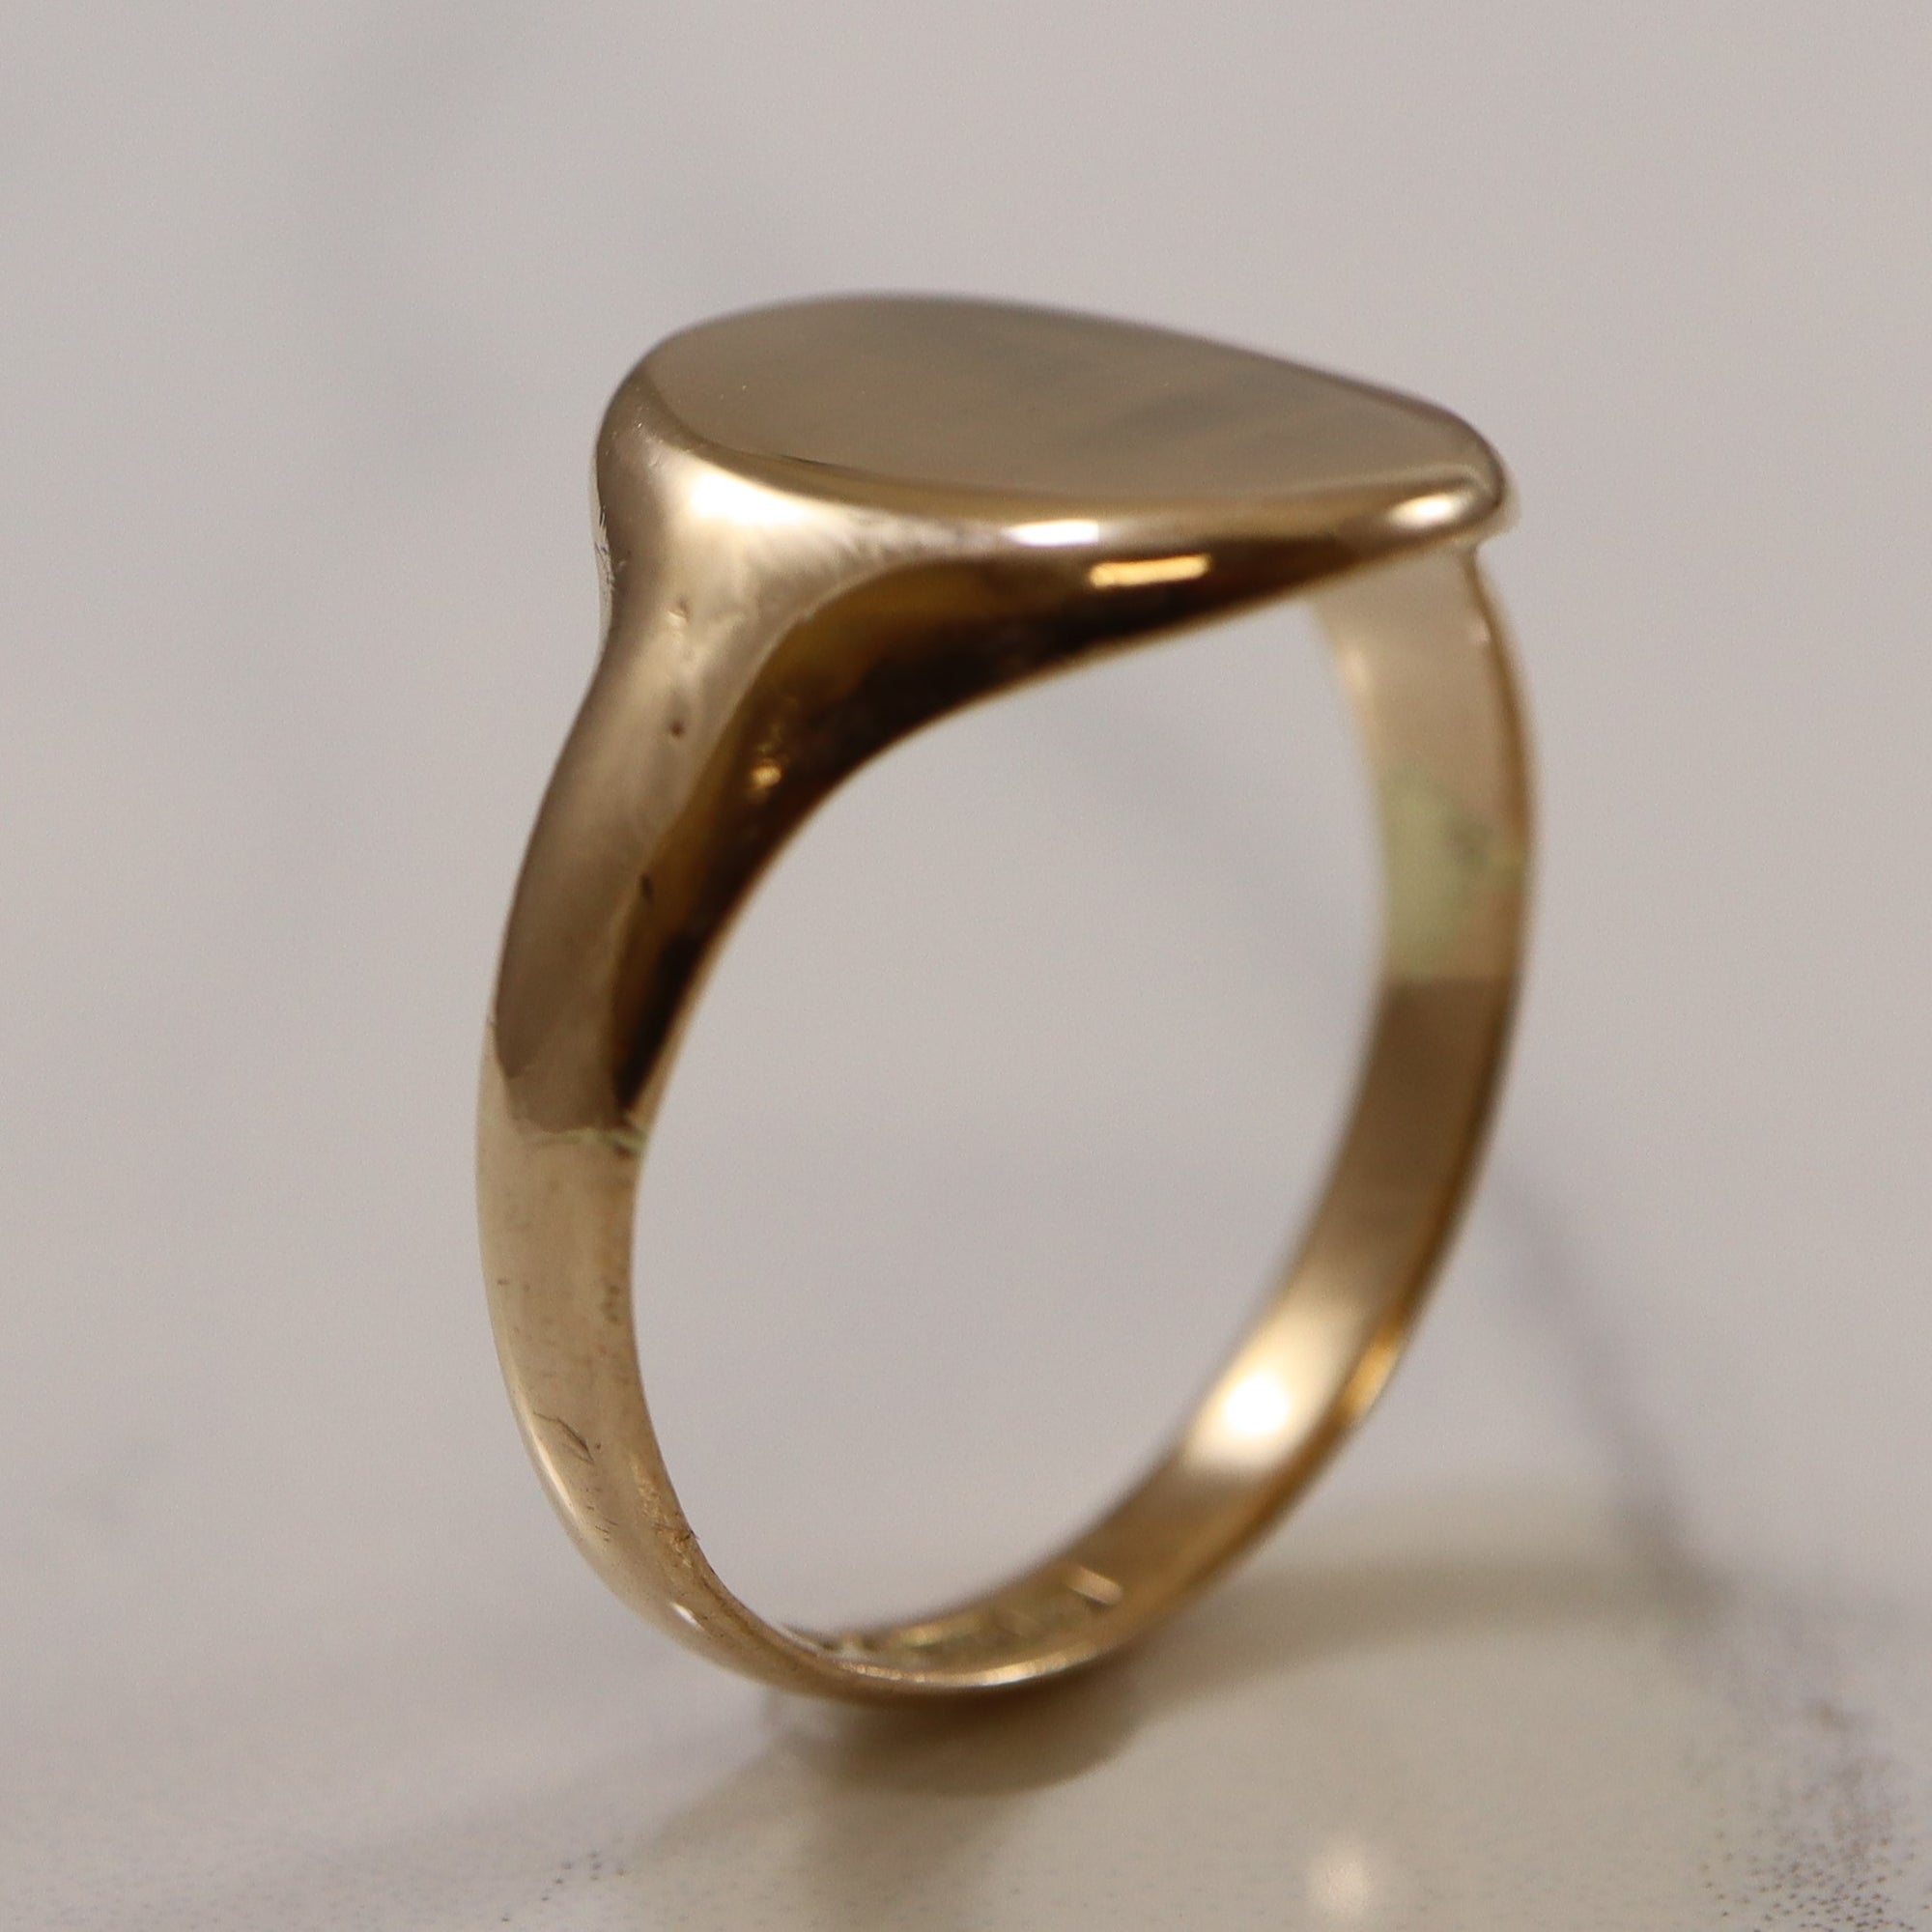 1940s Oval Signet Ring | SZ 8.75 |